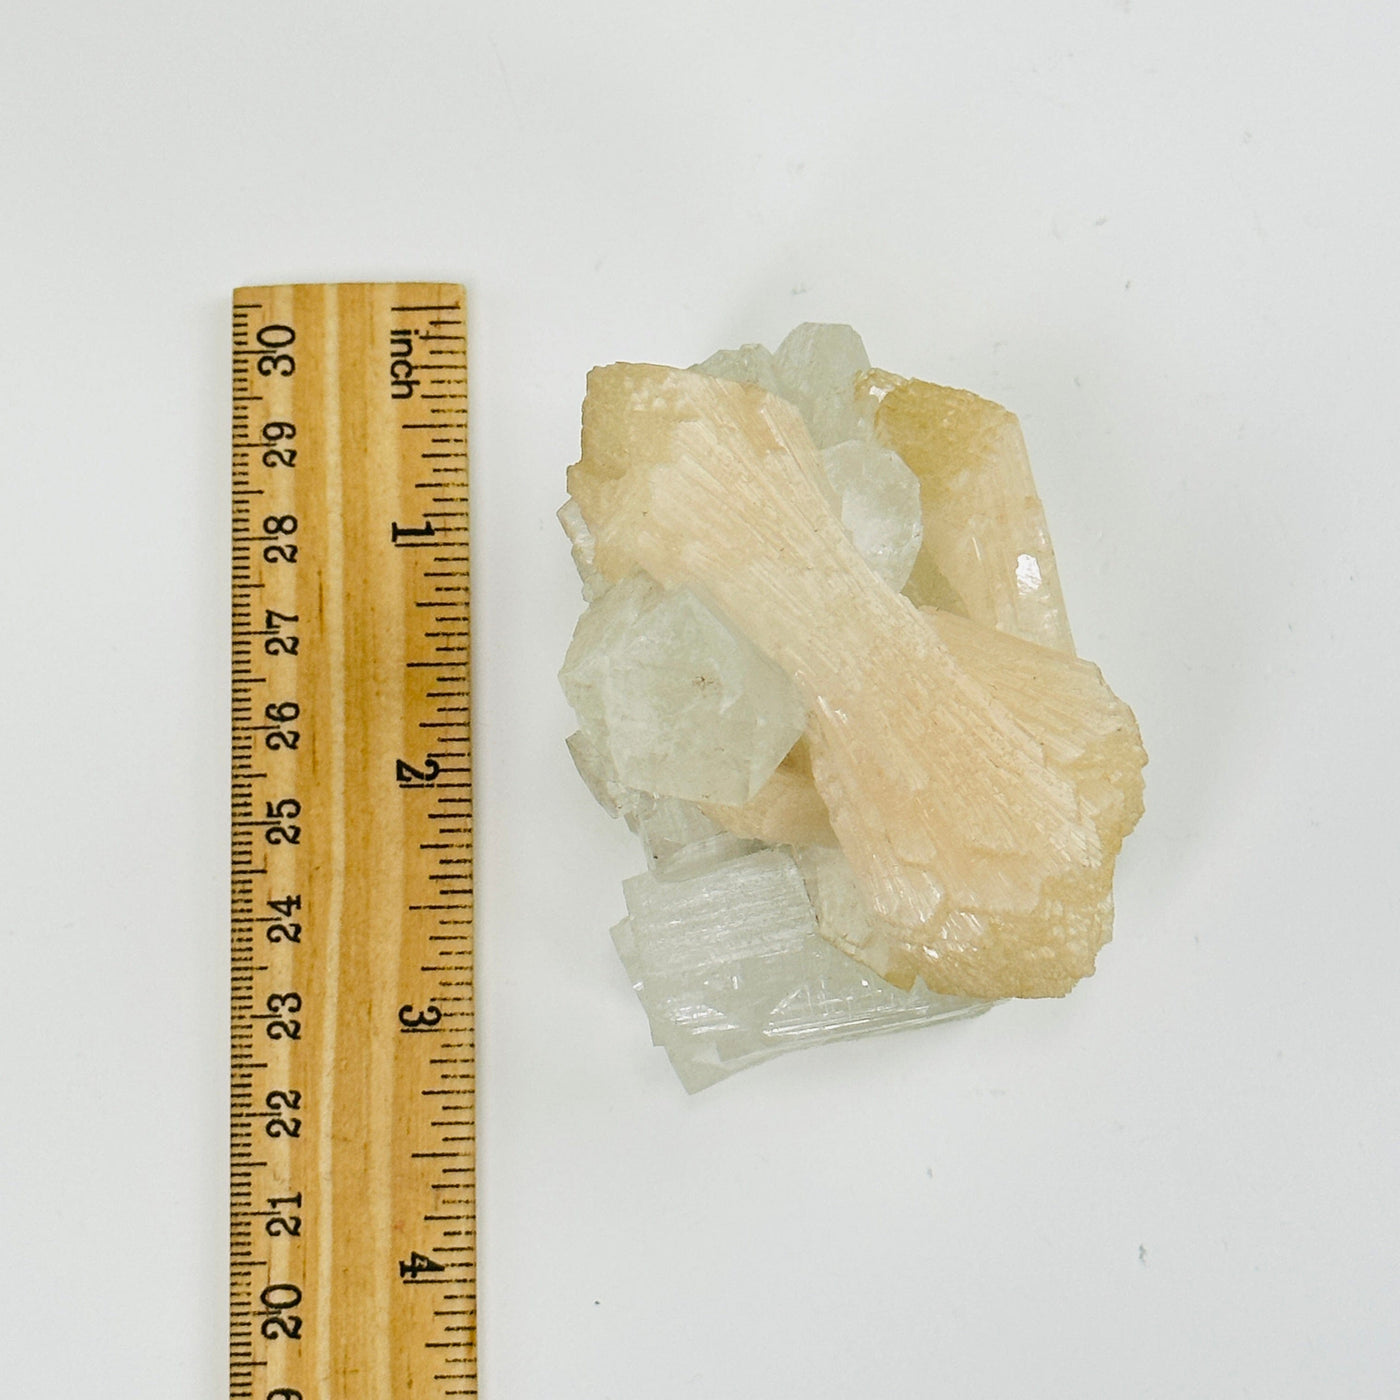 apophyllite with calcite formation next to a ruler for size reference